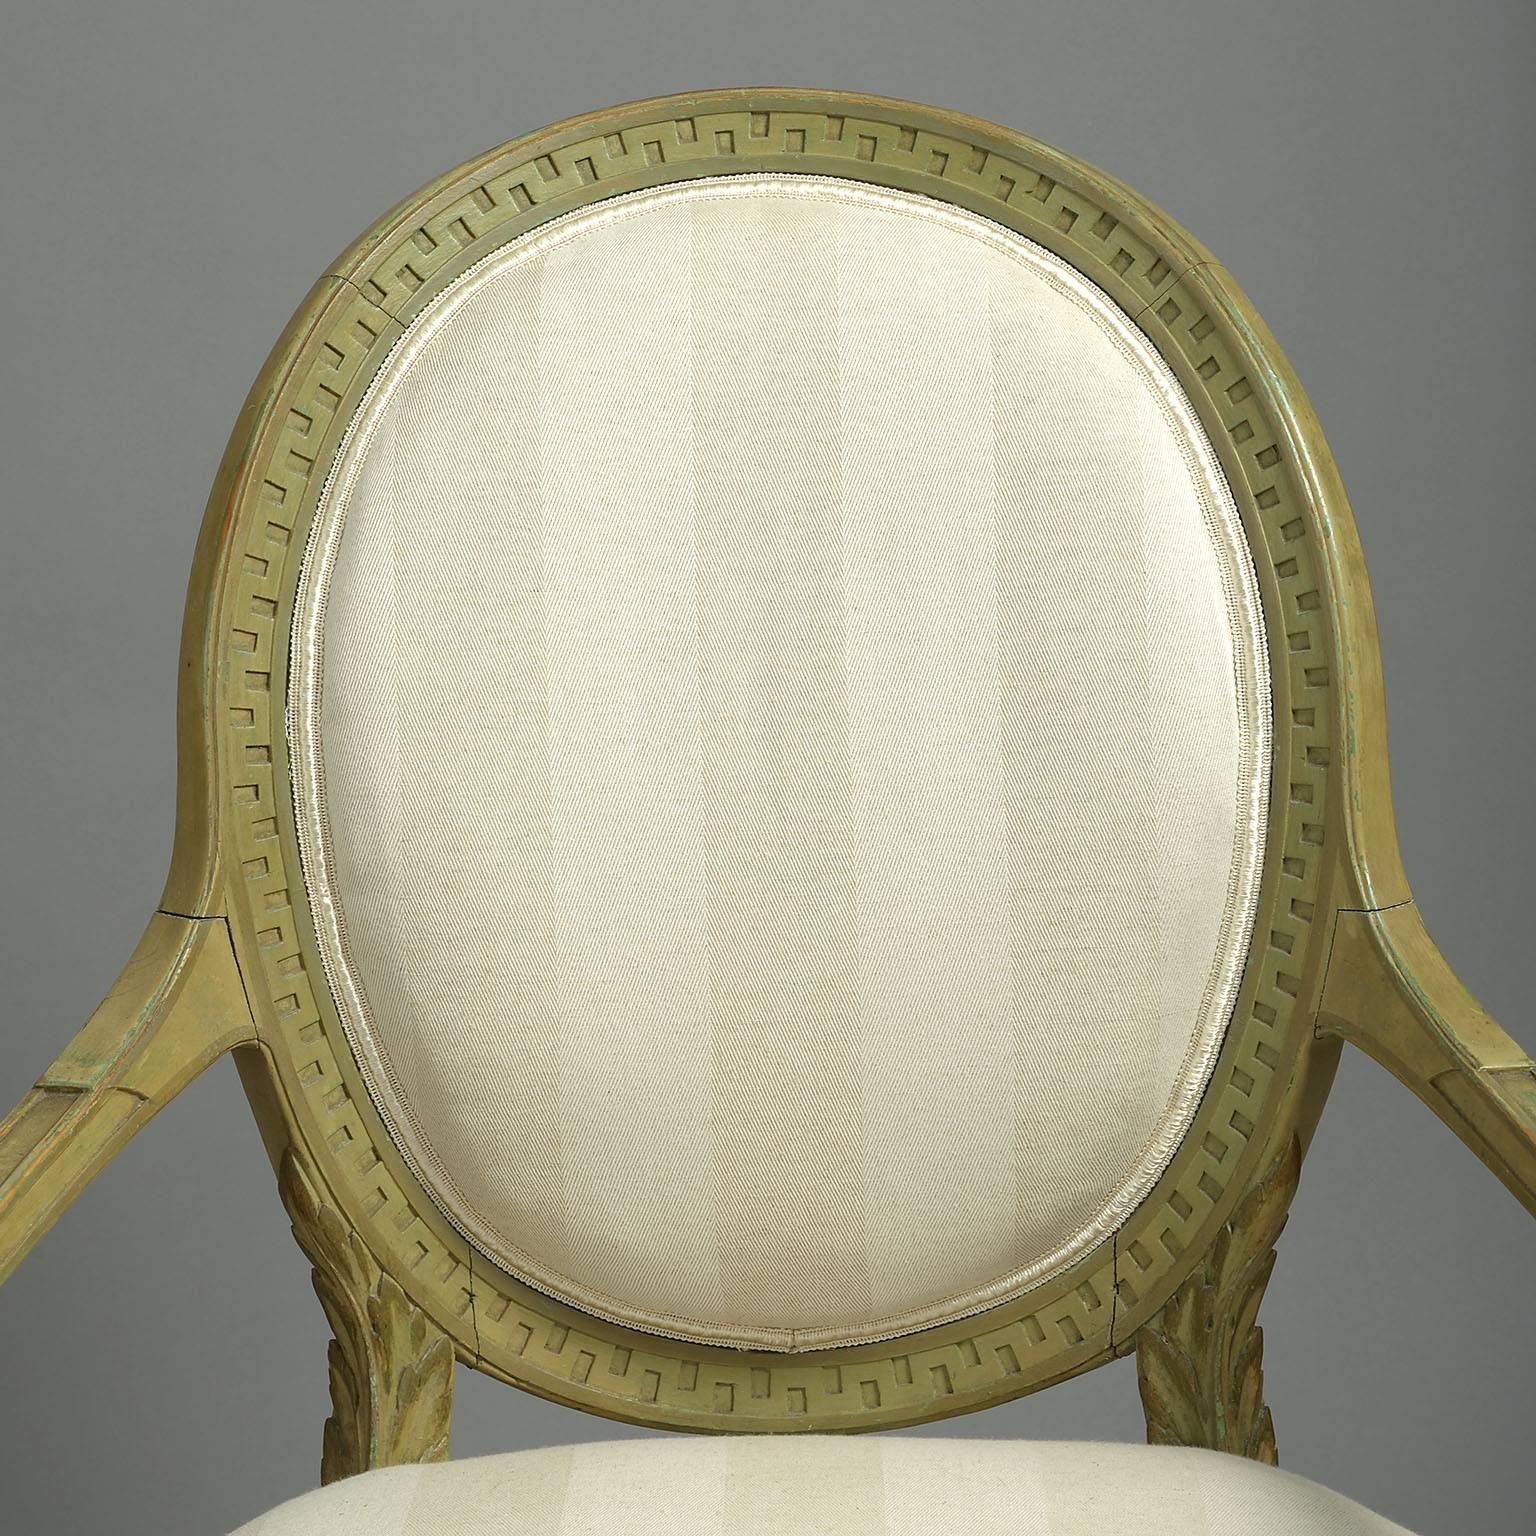 The oval backs with Greek key carved decoration, out-swept arms with acanthus leaf carved front supports in the neoclassical taste.
Traditionally upholstered sprung seat covered in a neutral, striped cream colored herringbone linen raised on square